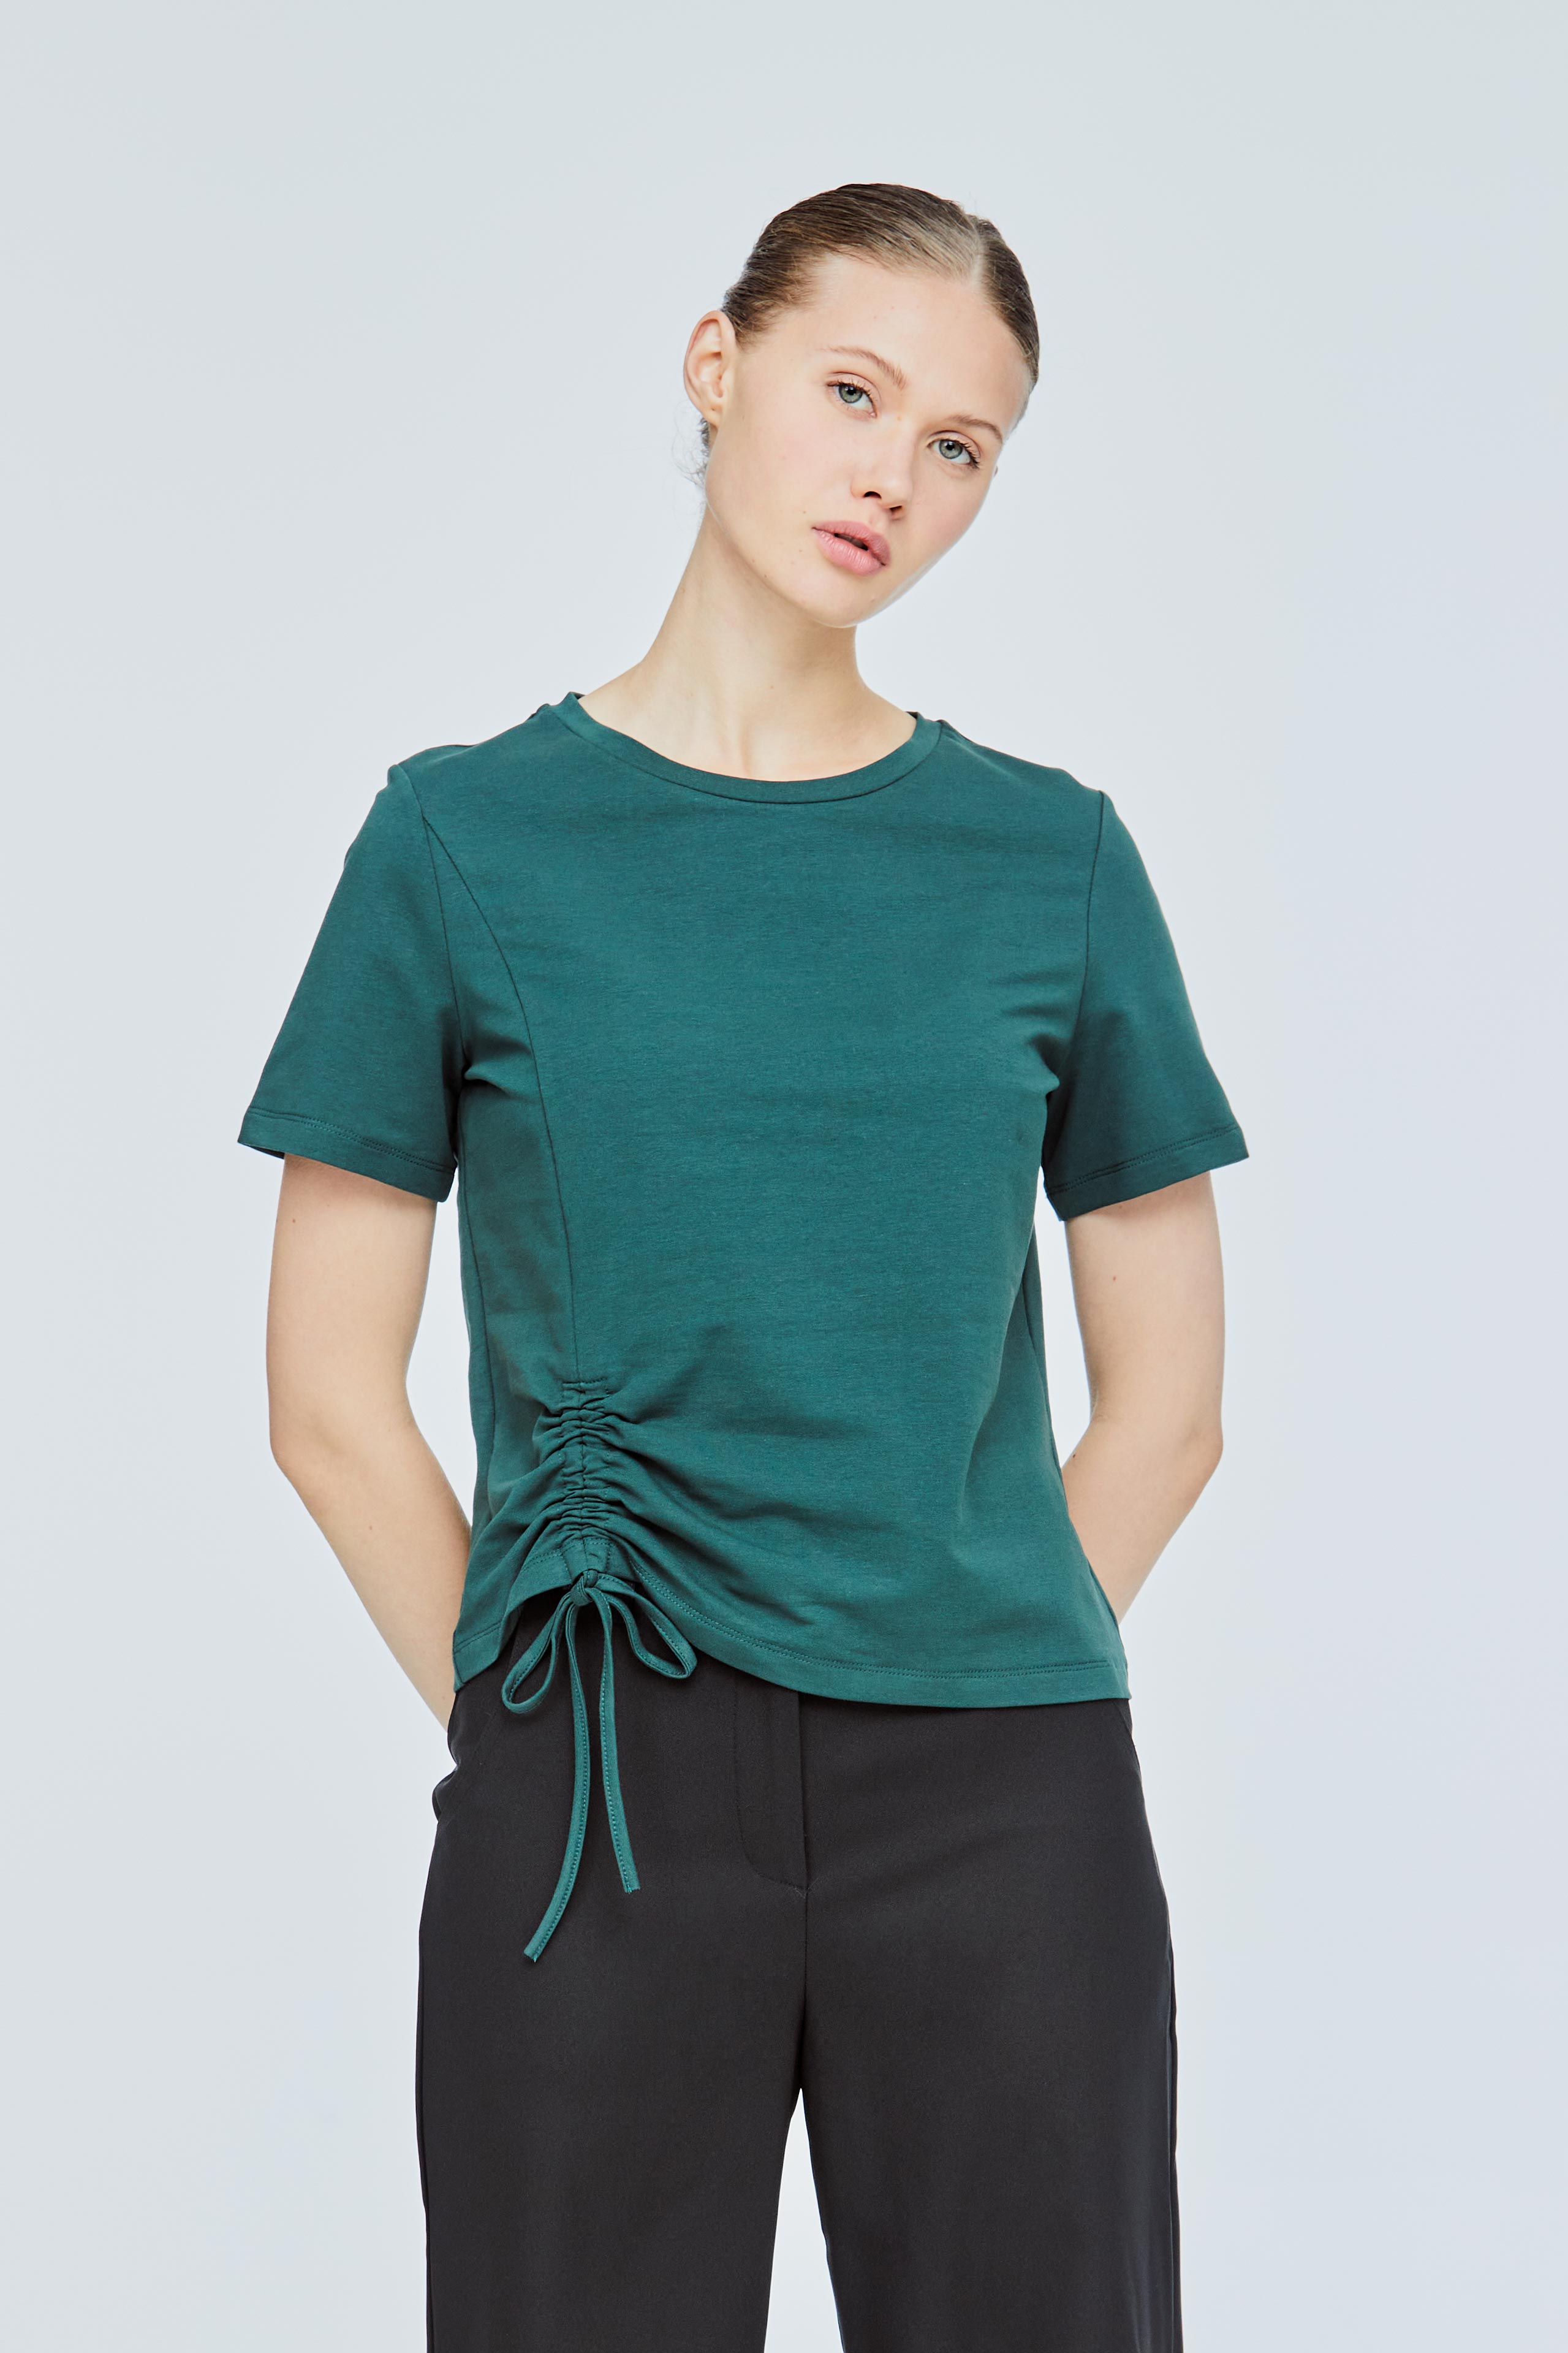 Ruched Blouse